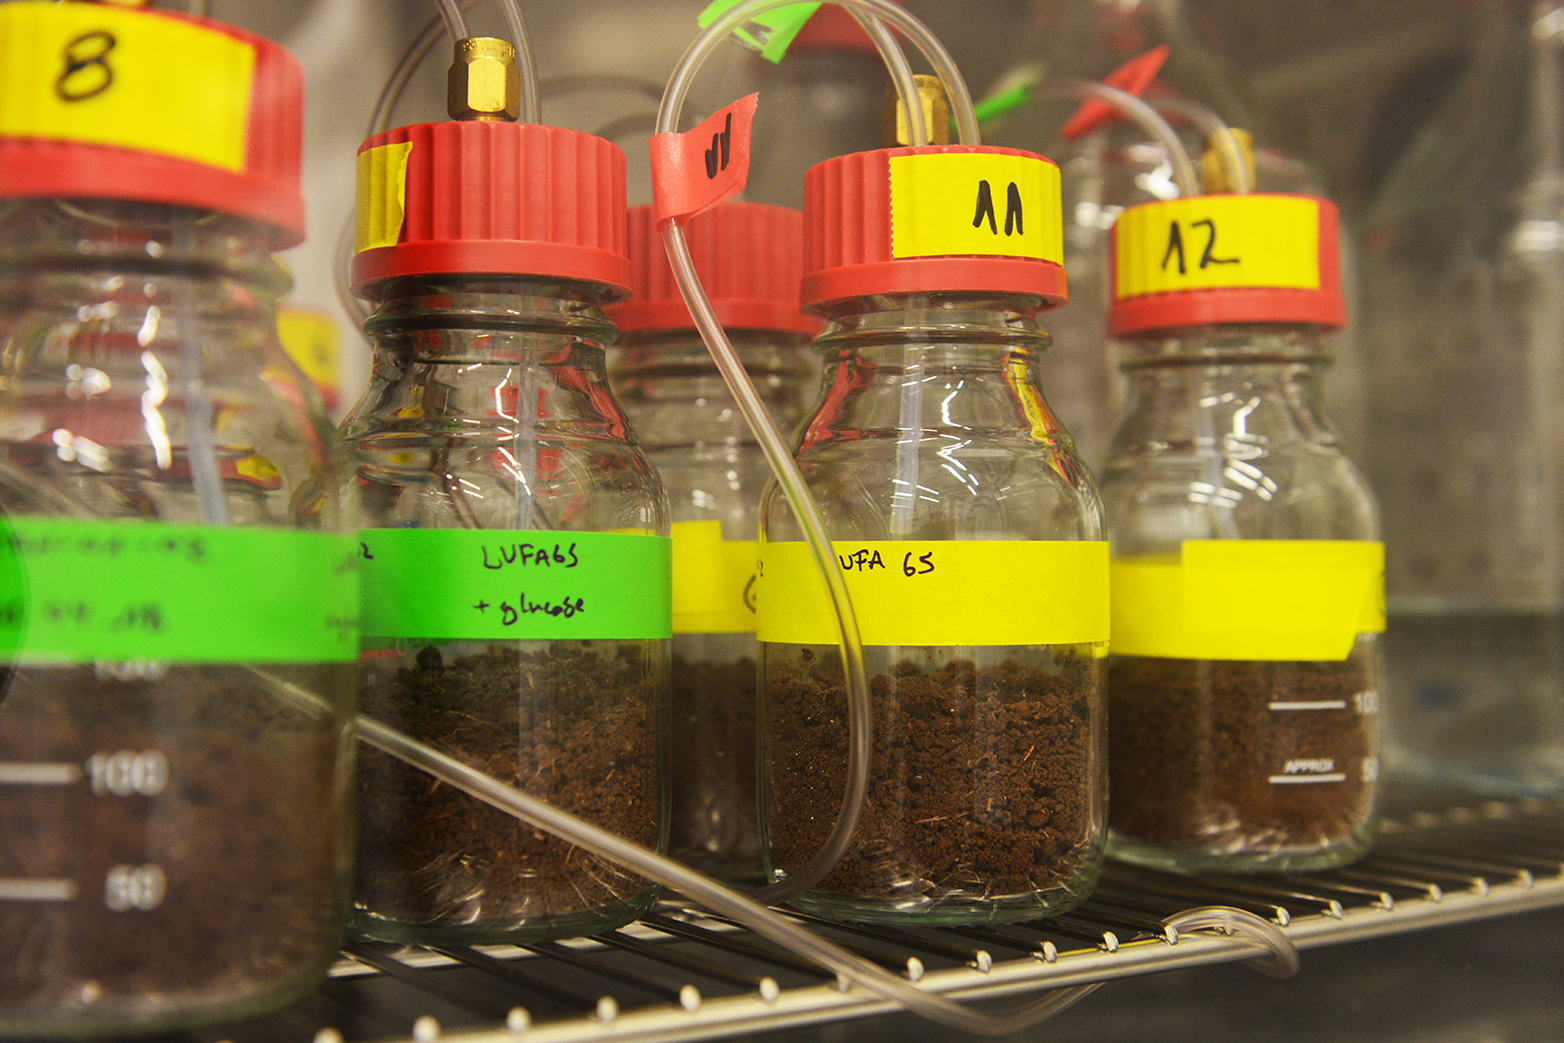 Enlarged view: The soils containing the pieces of mulch films are incubated in a temperature-controlled chamber. Microbes that biodegrade the films emit CO<sub>2</sub>, which is continuously analysed.